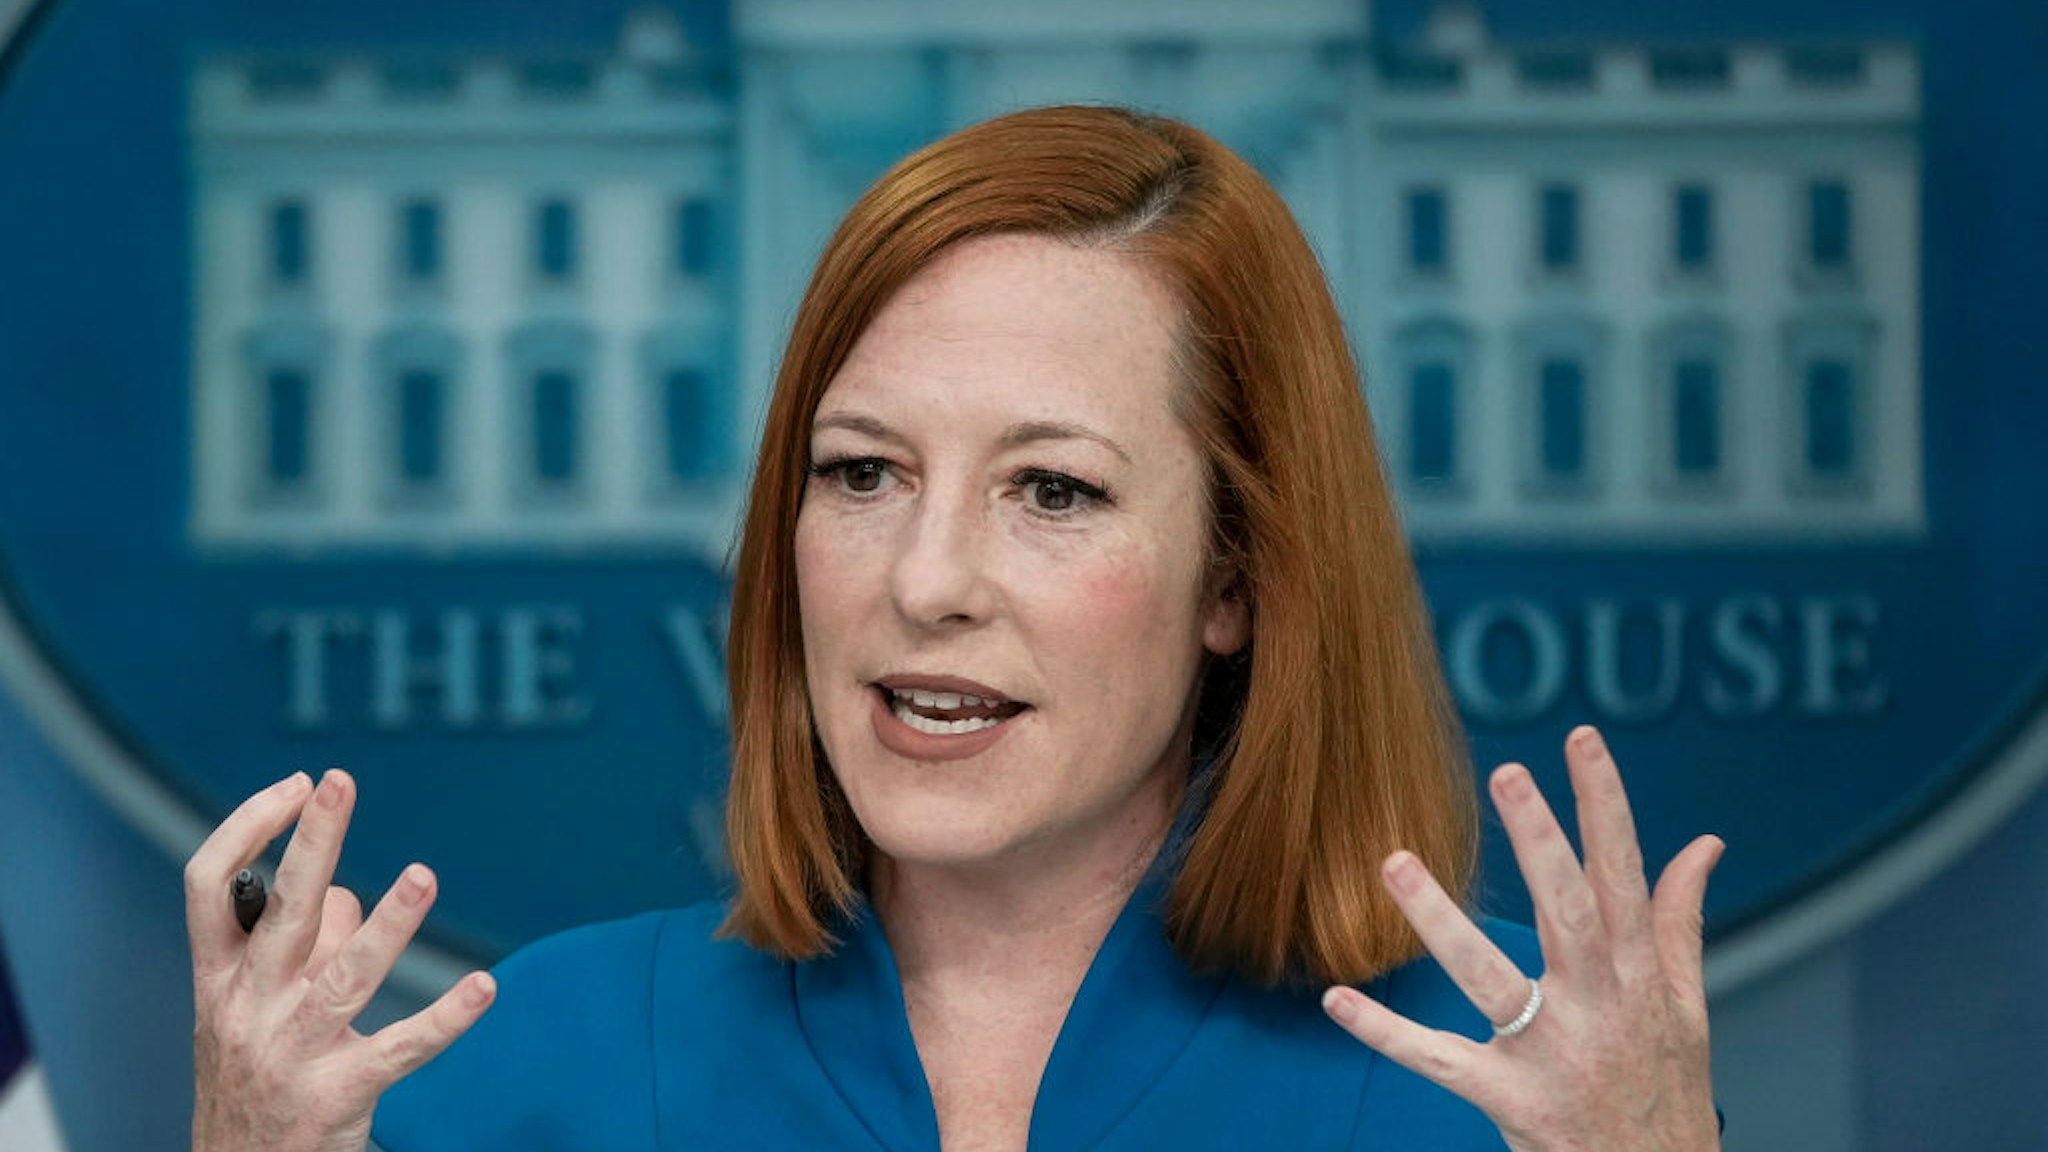 WASHINGTON, DC - APRIL 13: White House Press Secretary Jen Psaki speaks during the daily press briefing at the White House April 13, 2022 in Washington, DC. Psaki fielded a wide range of questions, including several on the Russian invasion of Ukraine. (Photo by Drew Angerer/Getty Images)